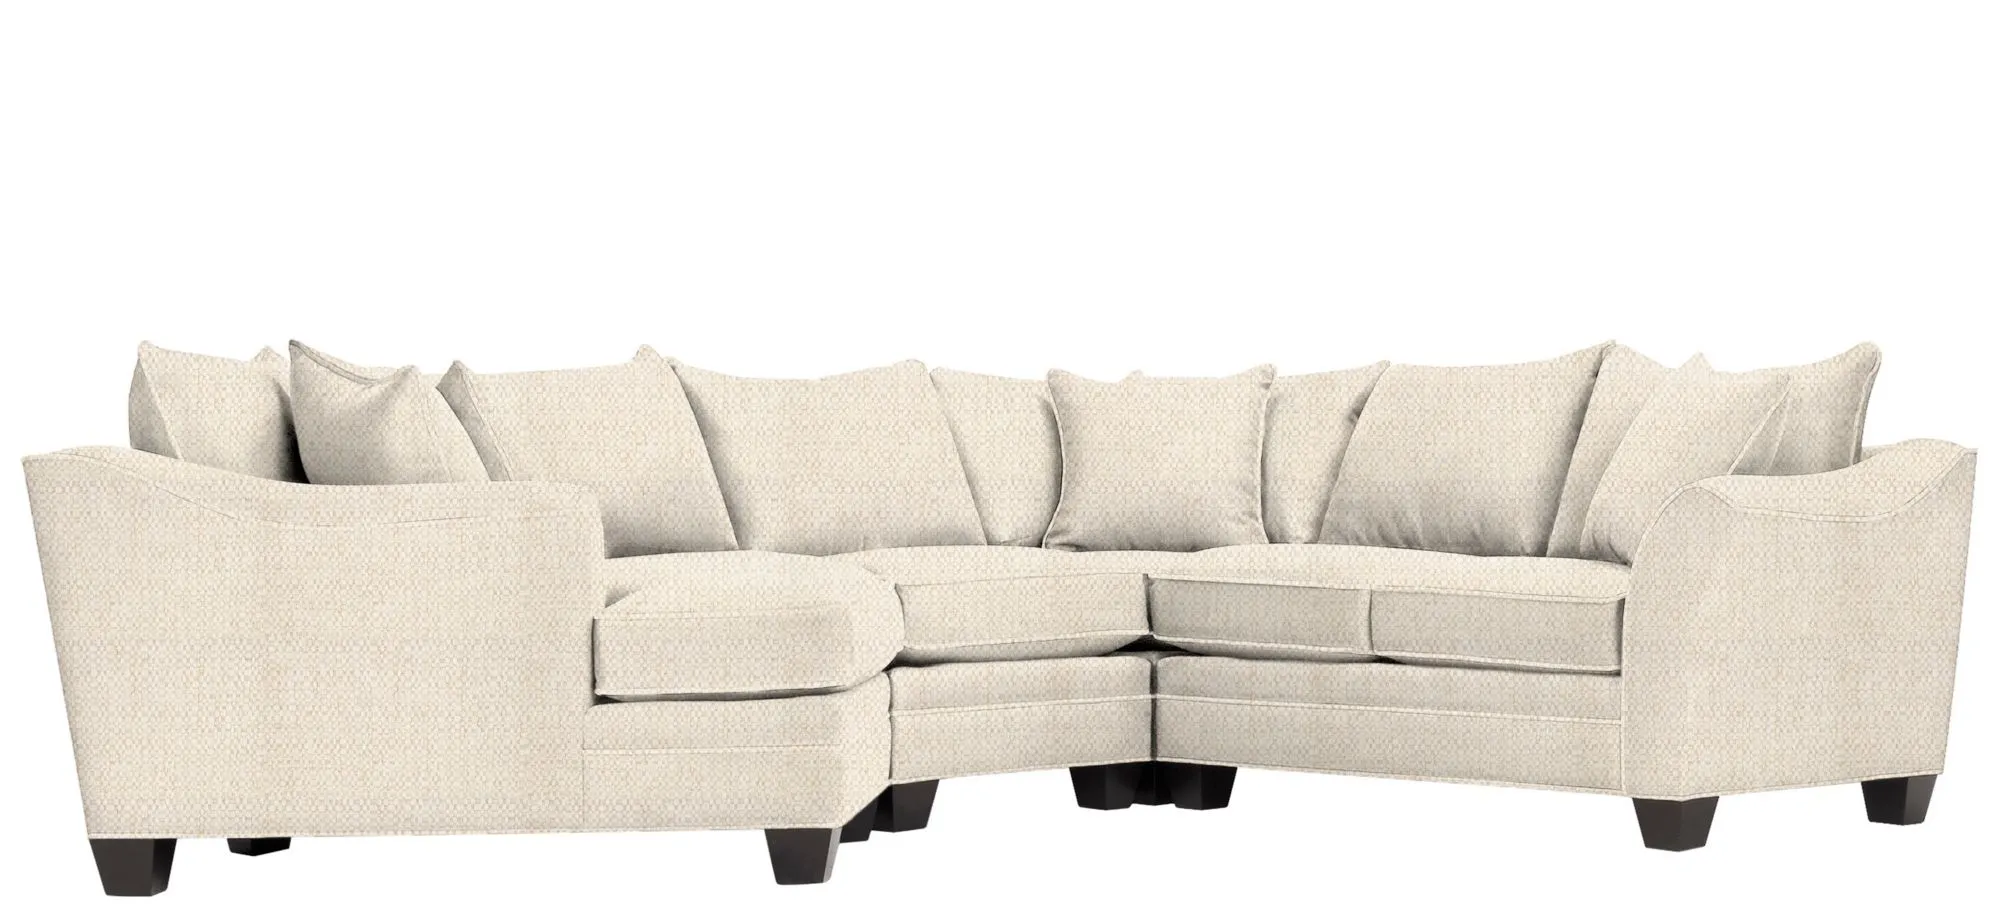 Foresthill 4-pc. Left Hand Cuddler Sectional Sofa in Sugar Shack Alabaster by H.M. Richards